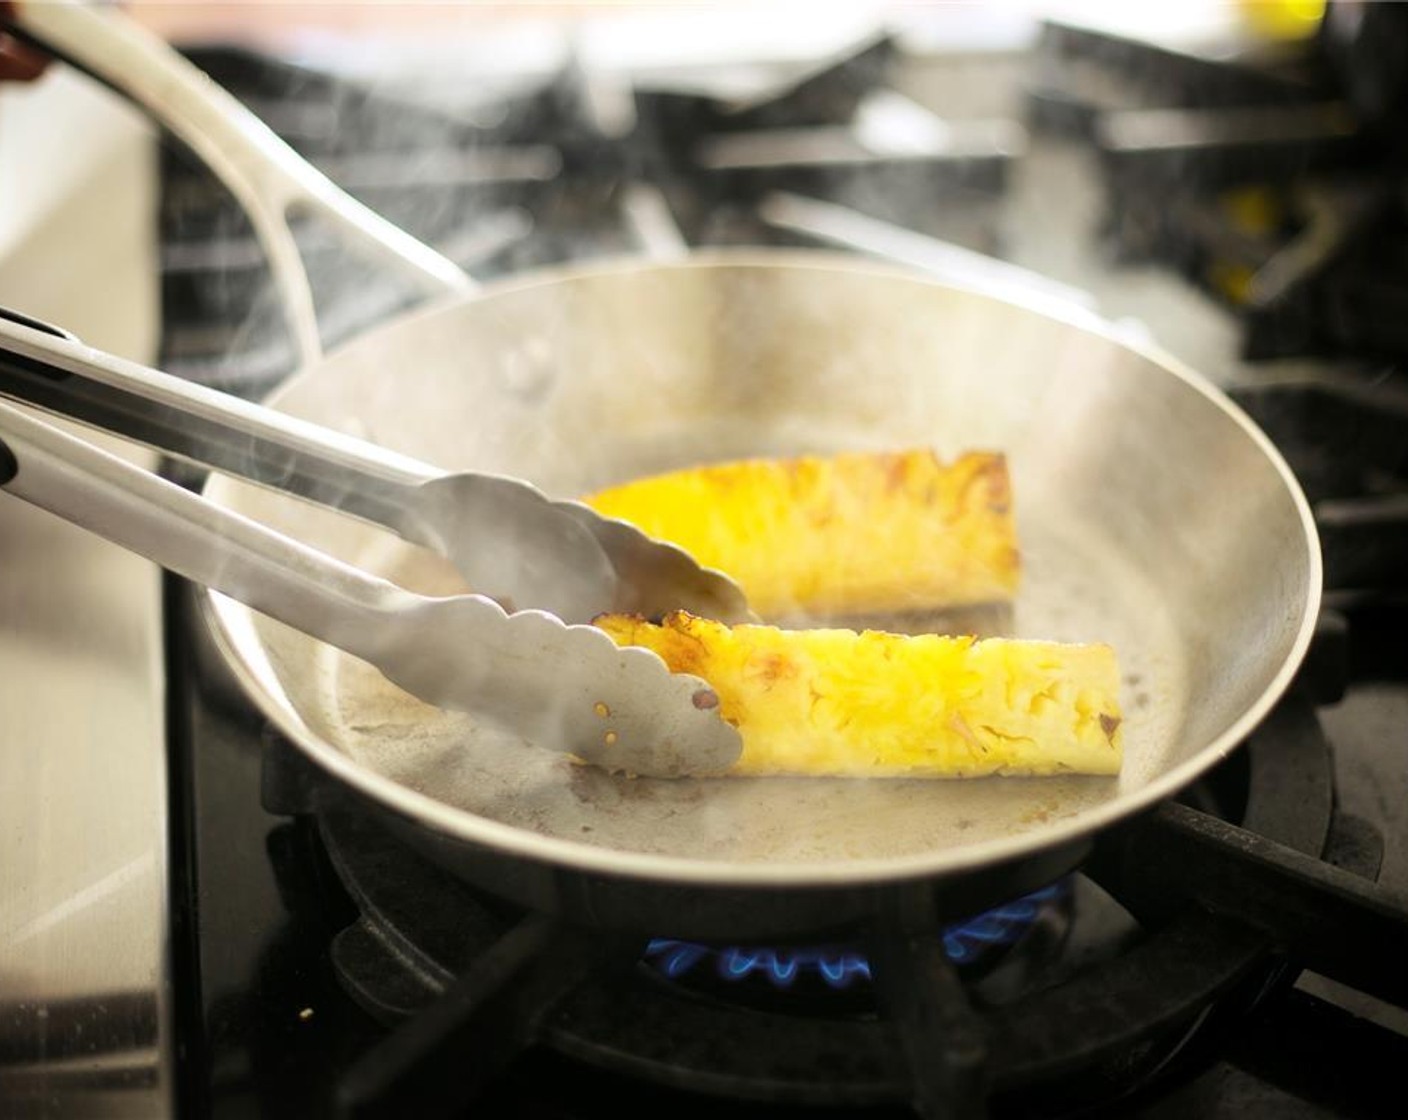 step 11 Meanwhile, in a medium sauté pan over high heat, add Oil (1 tsp). Once oil is hot, add Pineapple Spears (2) and sear one side for approximately 3 minutes, or until there is a golden sear.